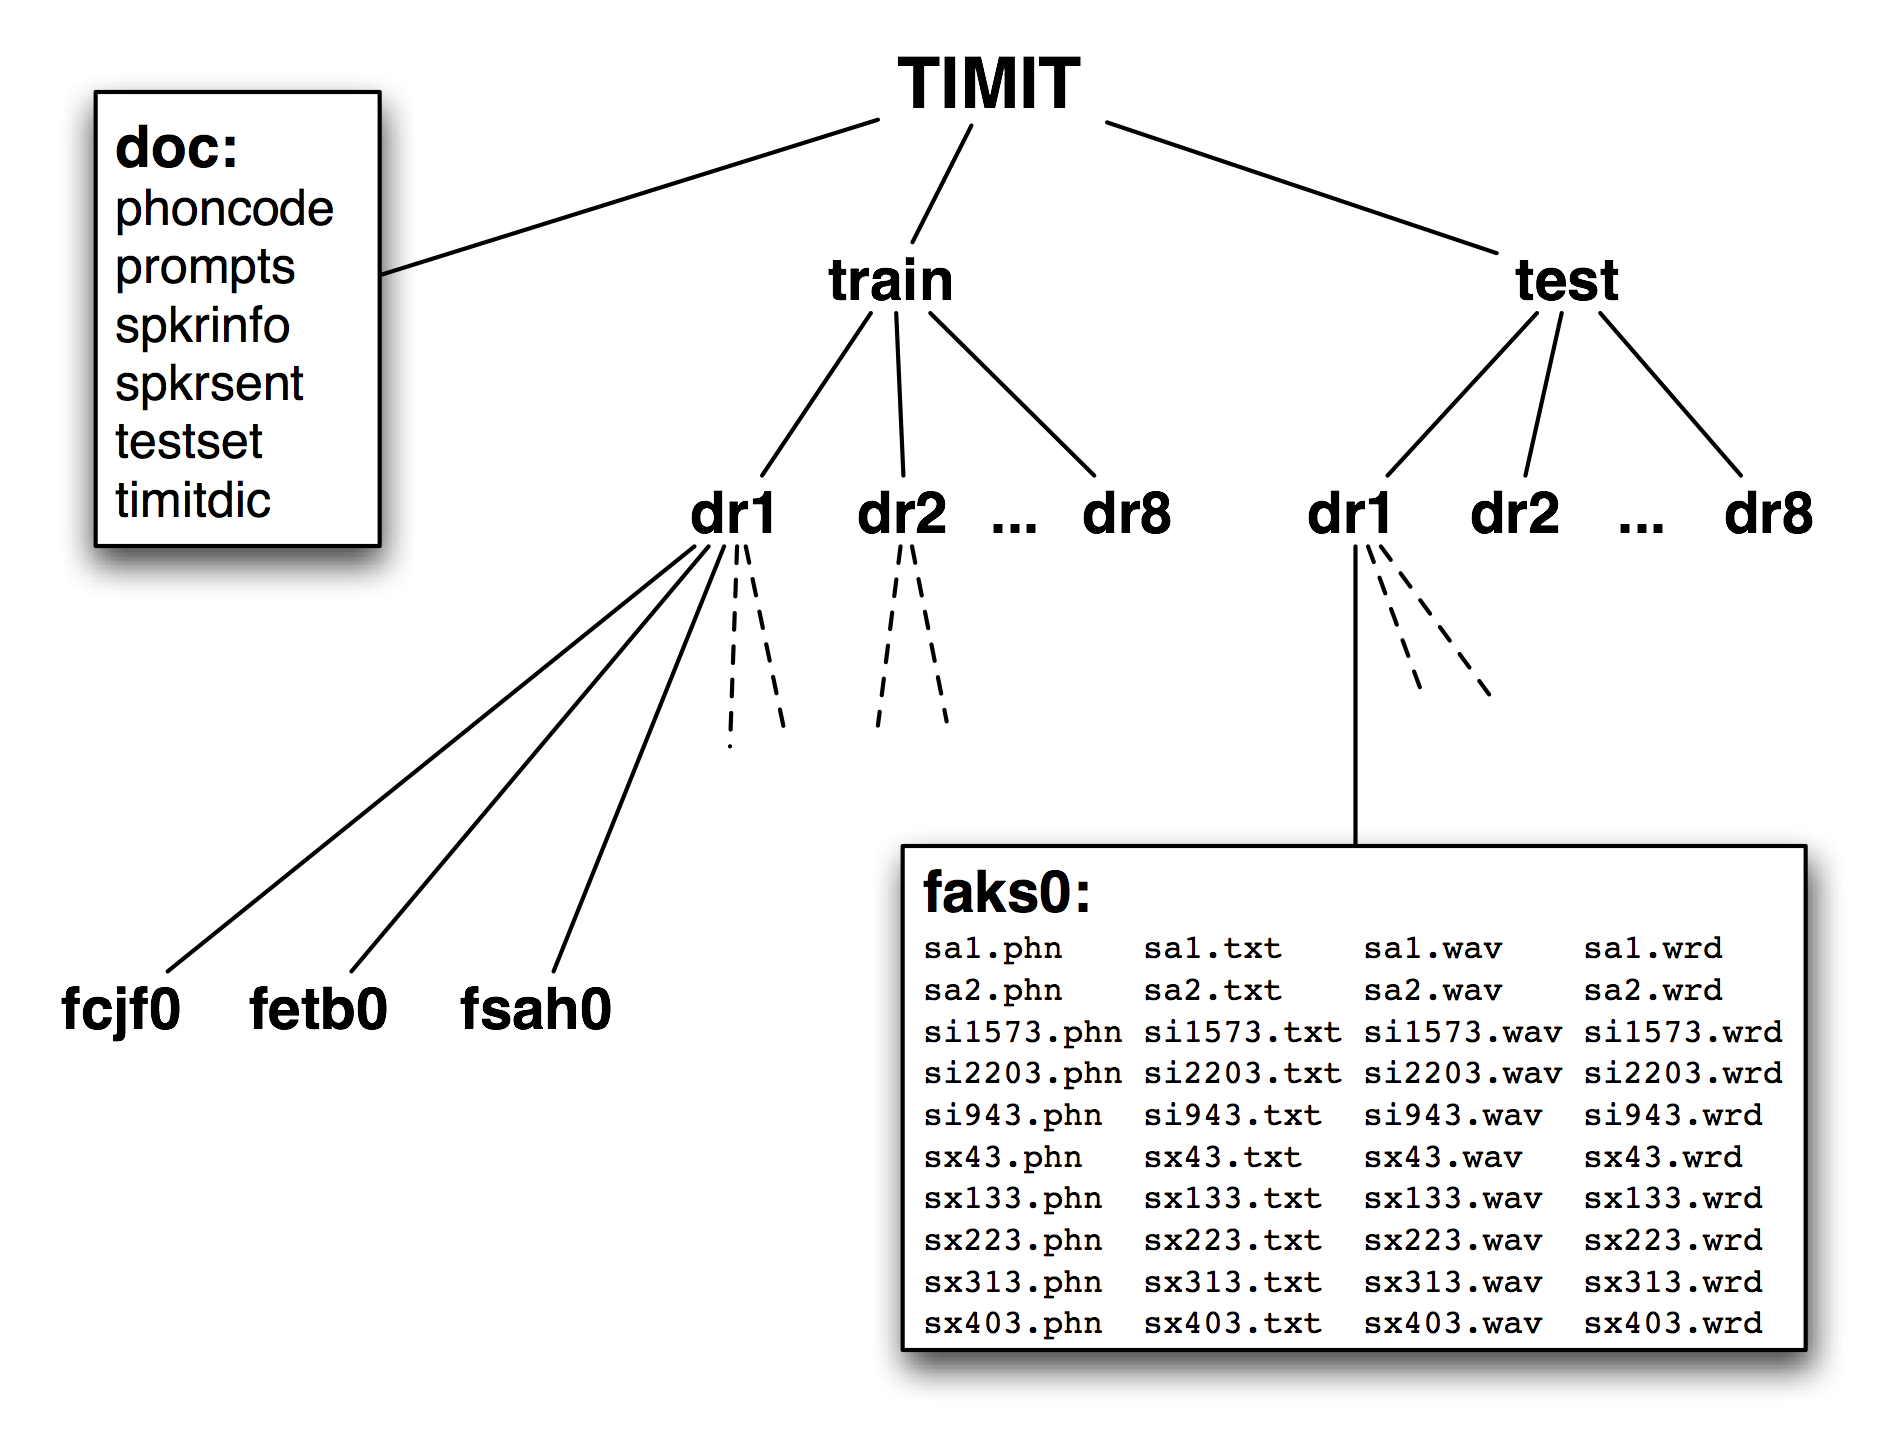 Images/timit-structure.png